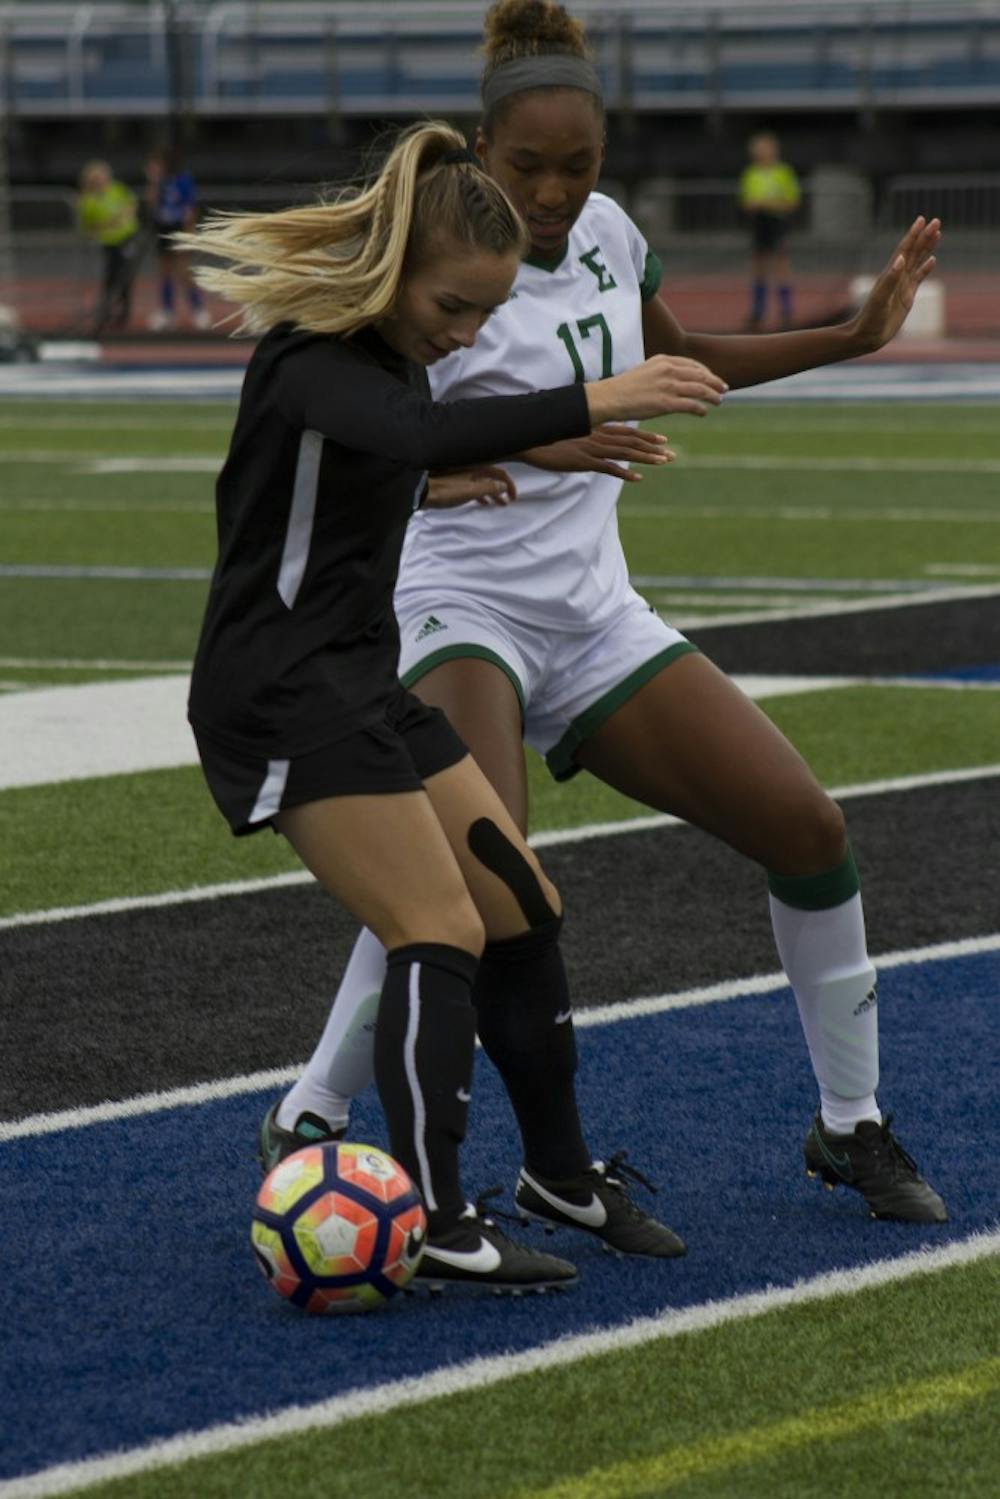 <p>Senior forward Carissima Cutrona goes down with a knee injury. Cutrona leads the Bulls in goals and assists on the season. The coaching staff is hopeful she can play again this season.</p>